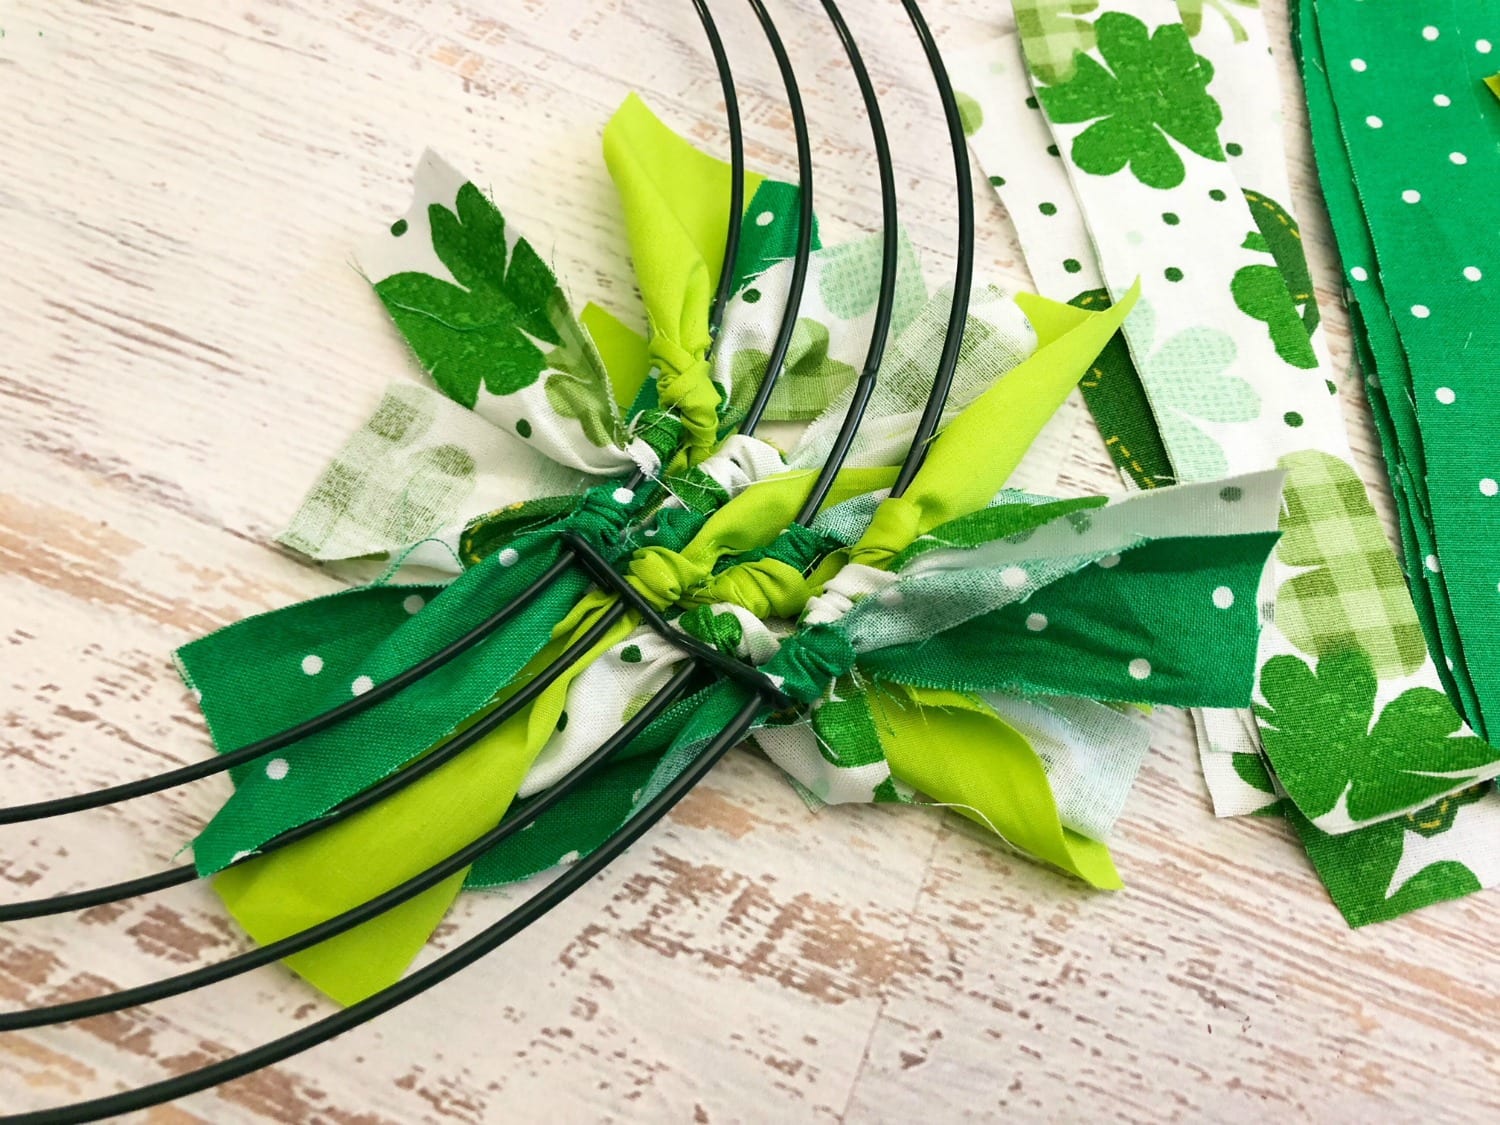 Green Fabric tied onto the frame will make your wreath perfect for St. Patrick's day!